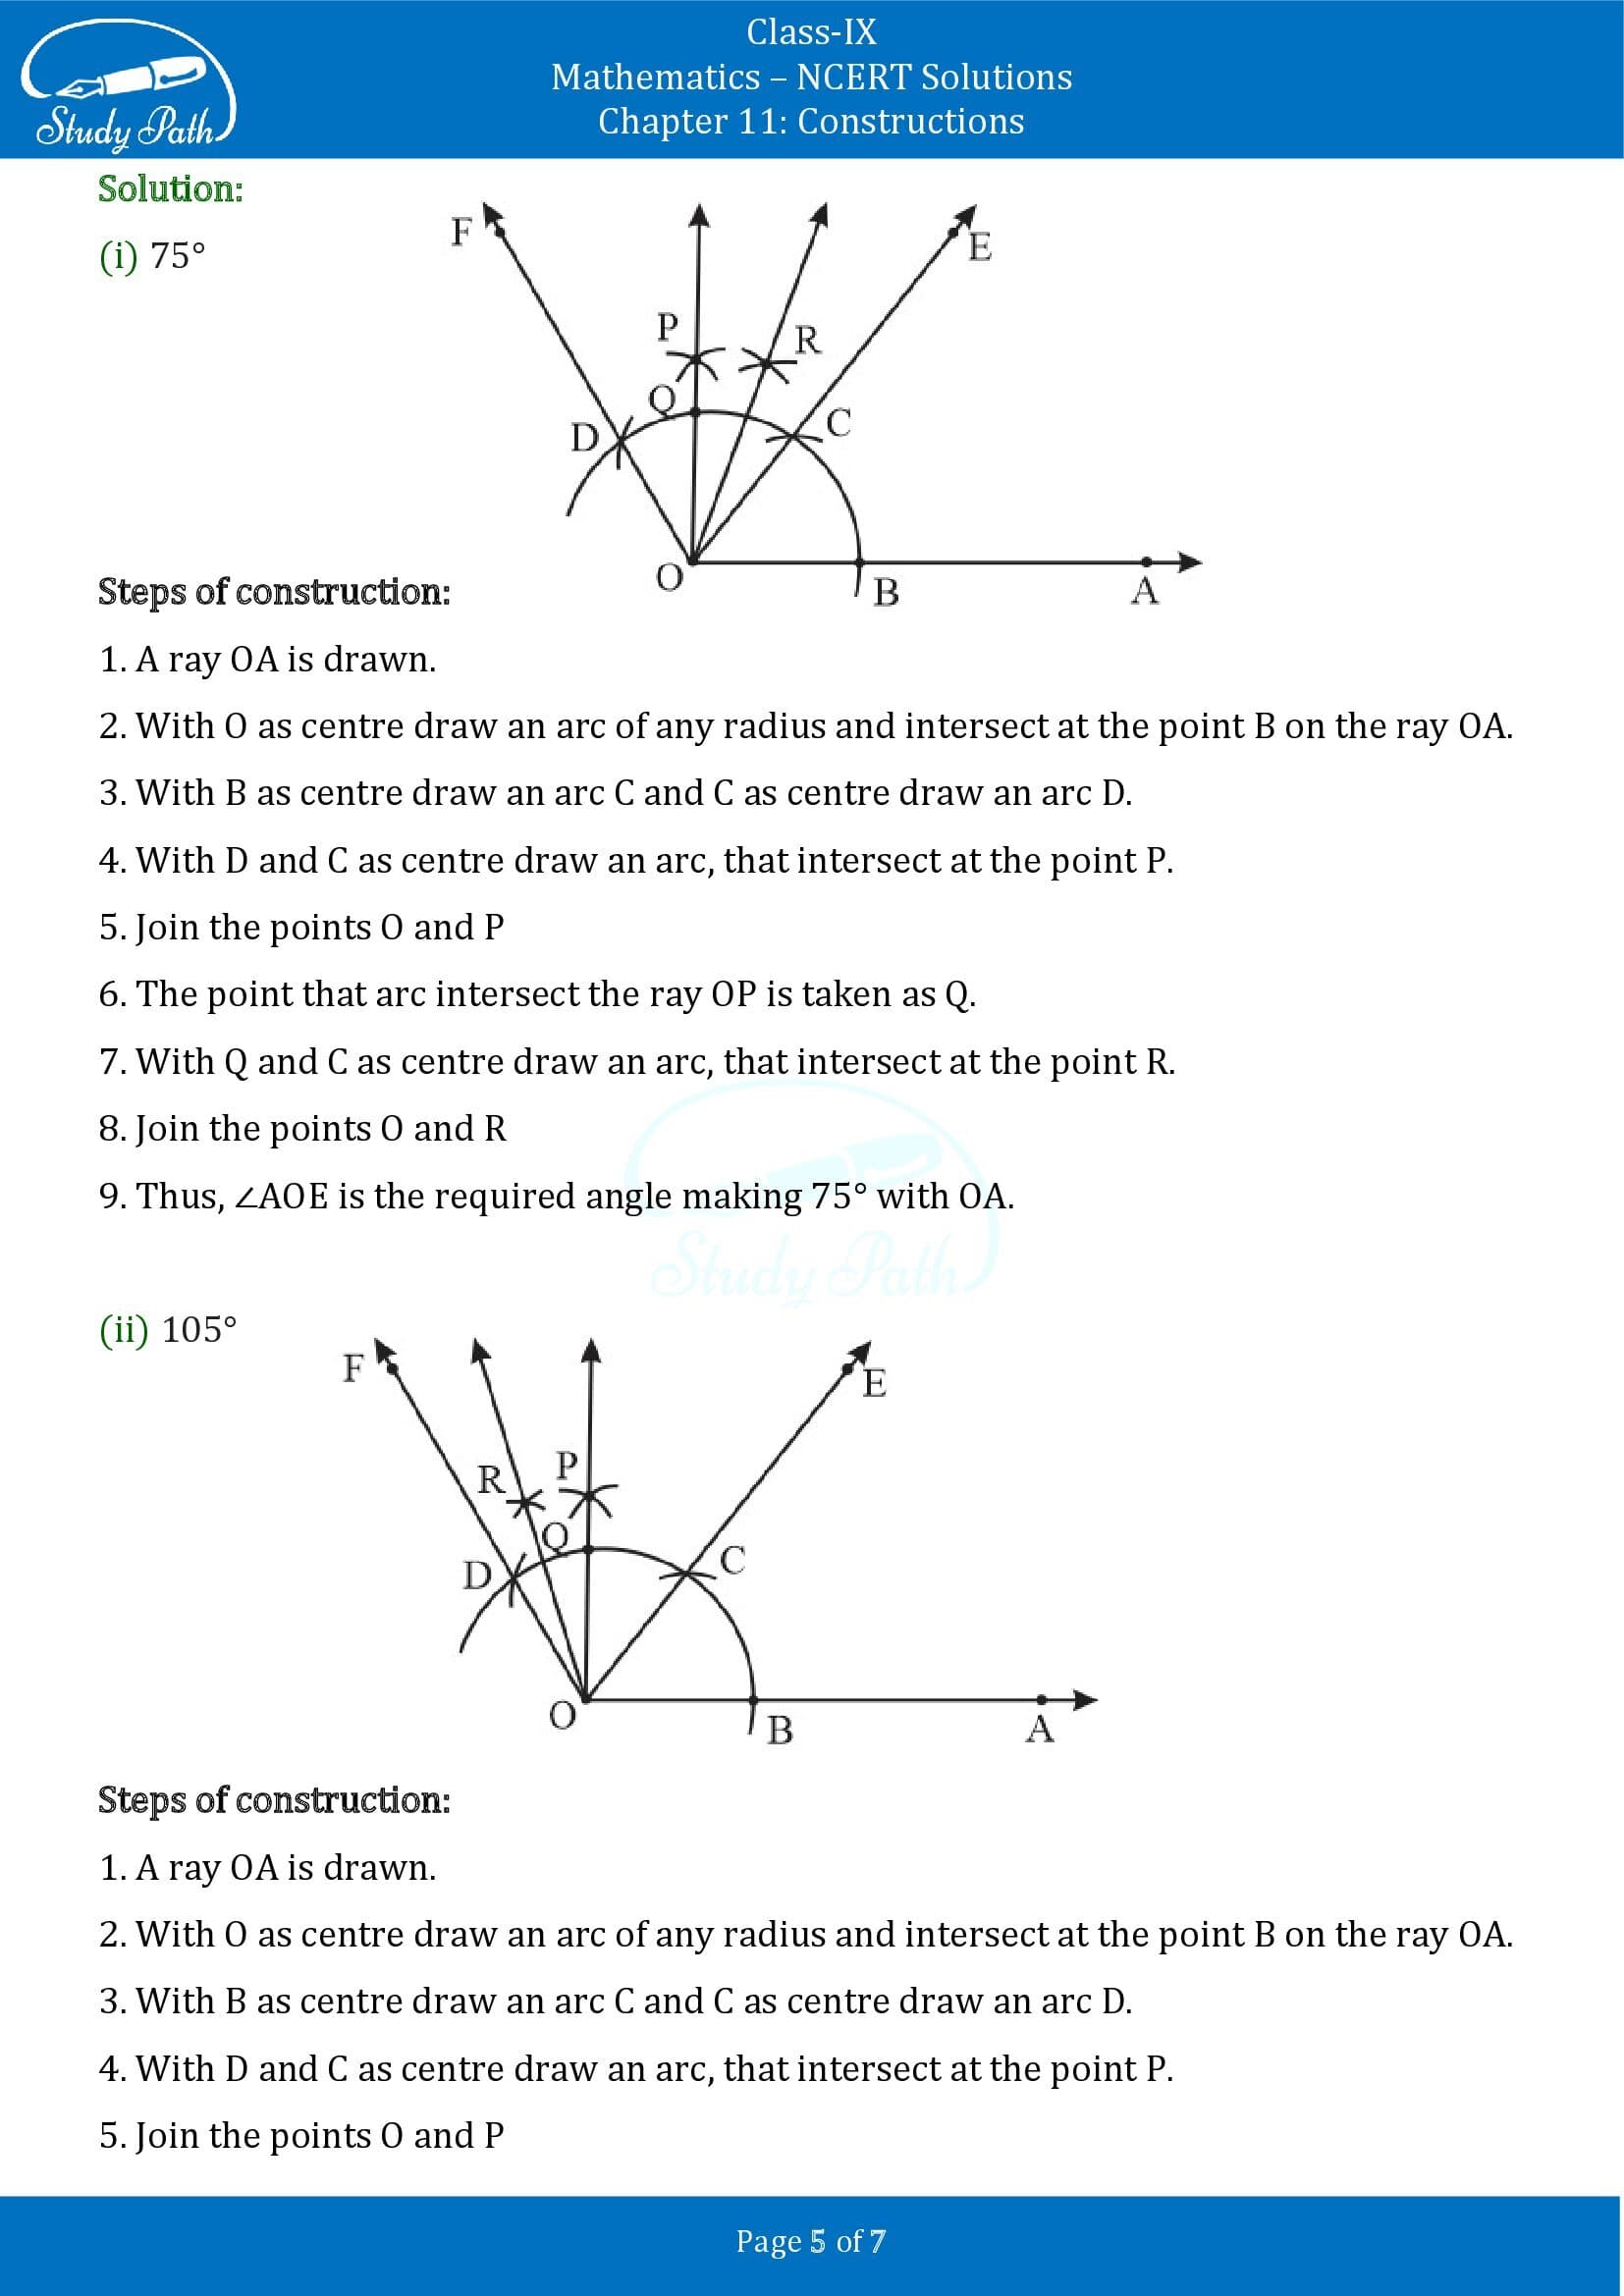 NCERT Solutions for Class 9 Maths Chapter 11 Constructions Exercise 11.1 00005